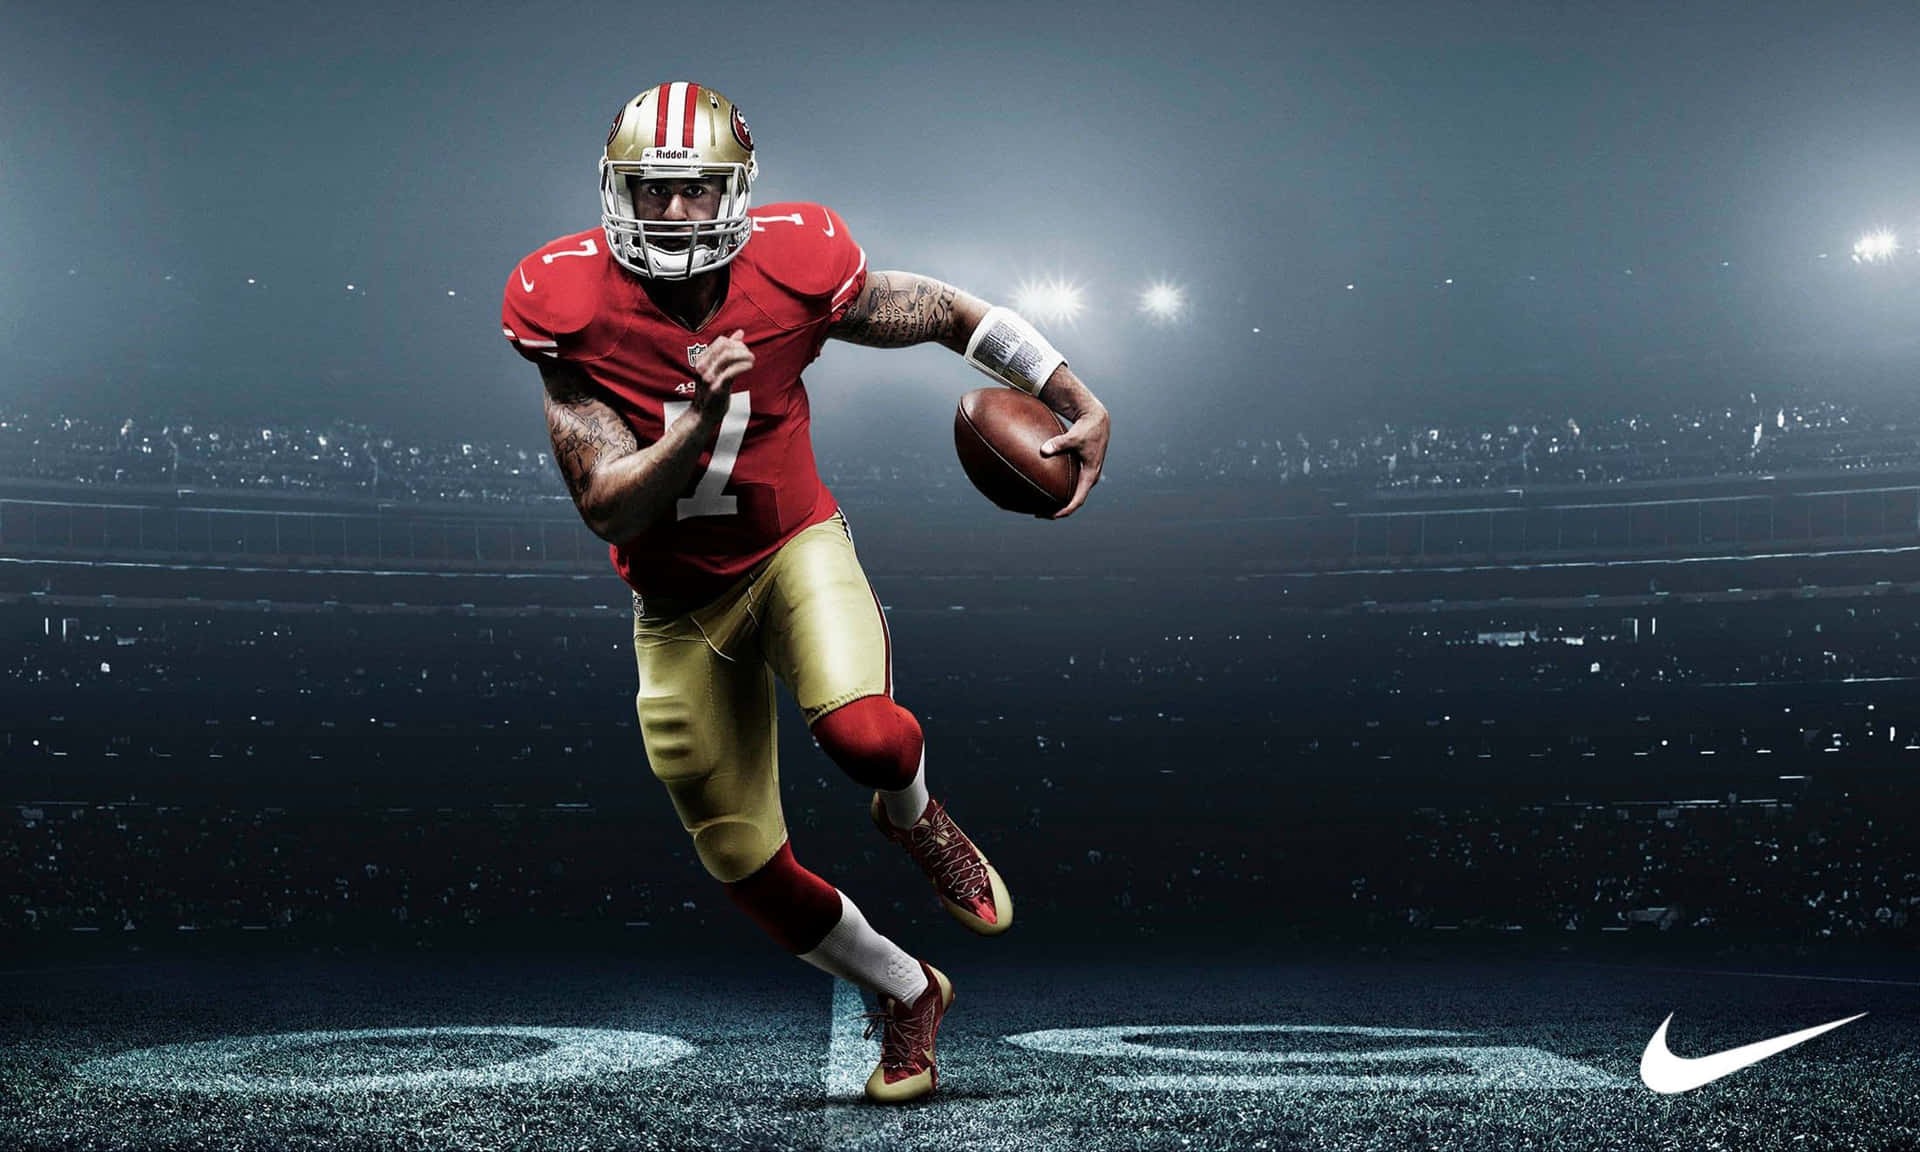 Join The Excitement Of The Nfl With These Awesome Hd Images Background